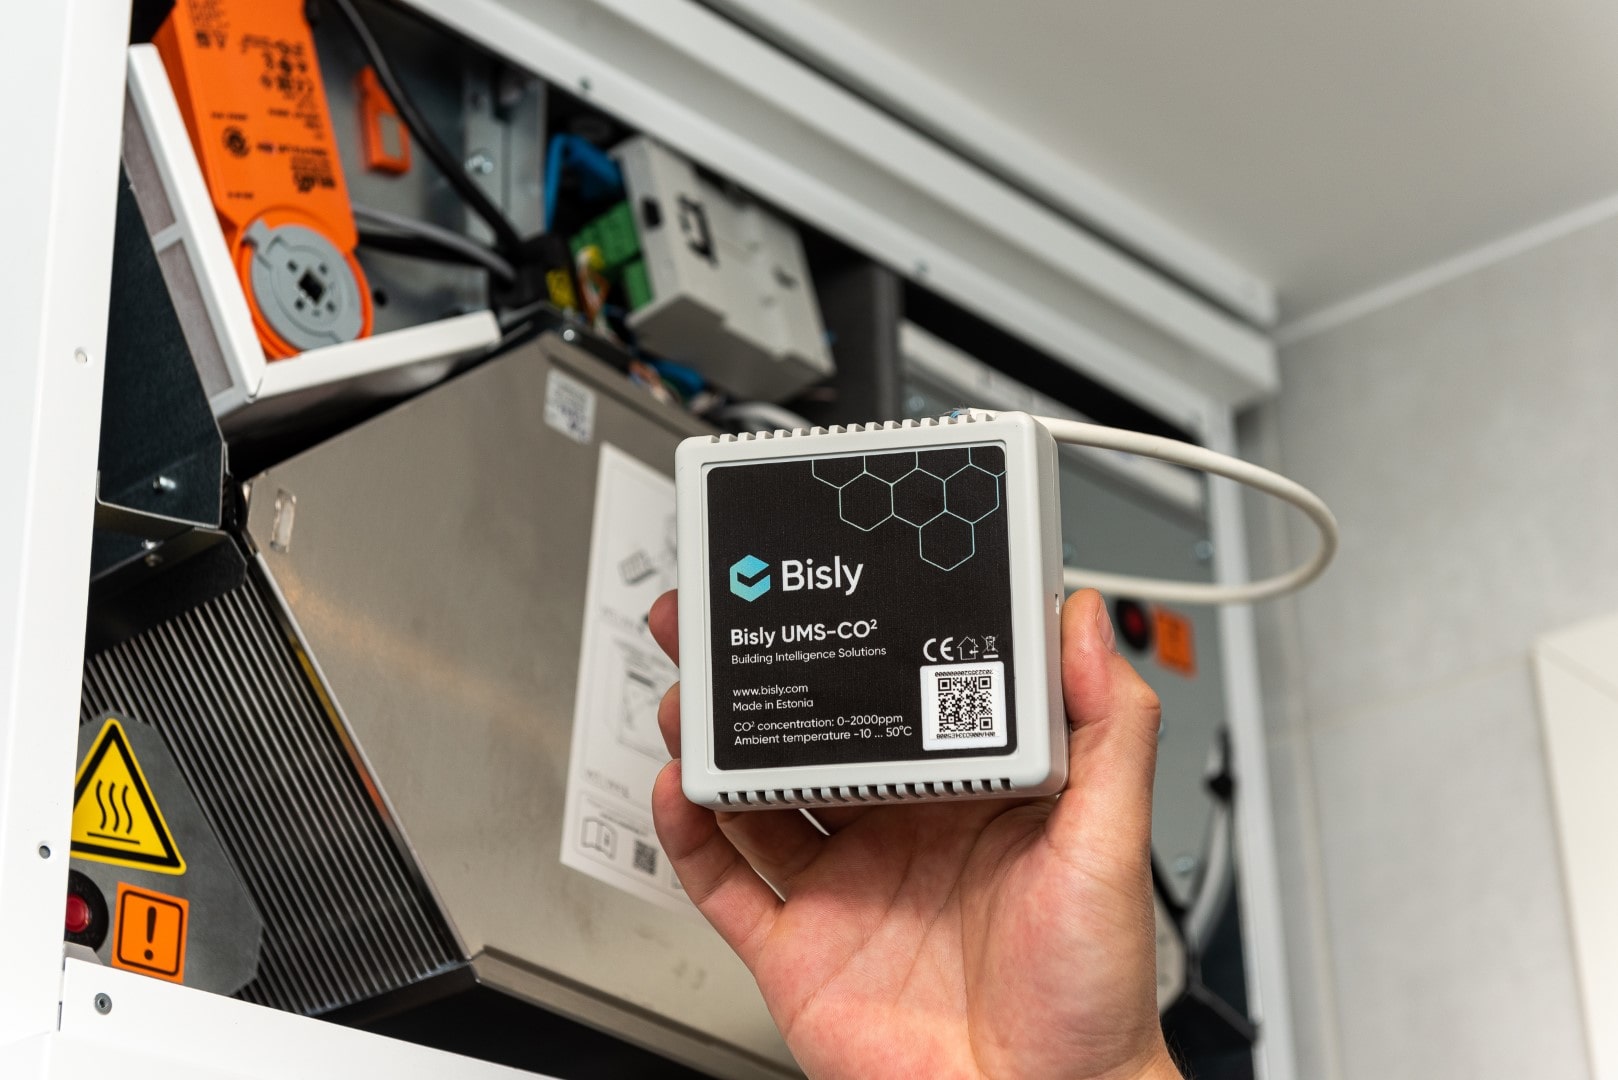 Bisly Smart Home technology and EU Green Deal